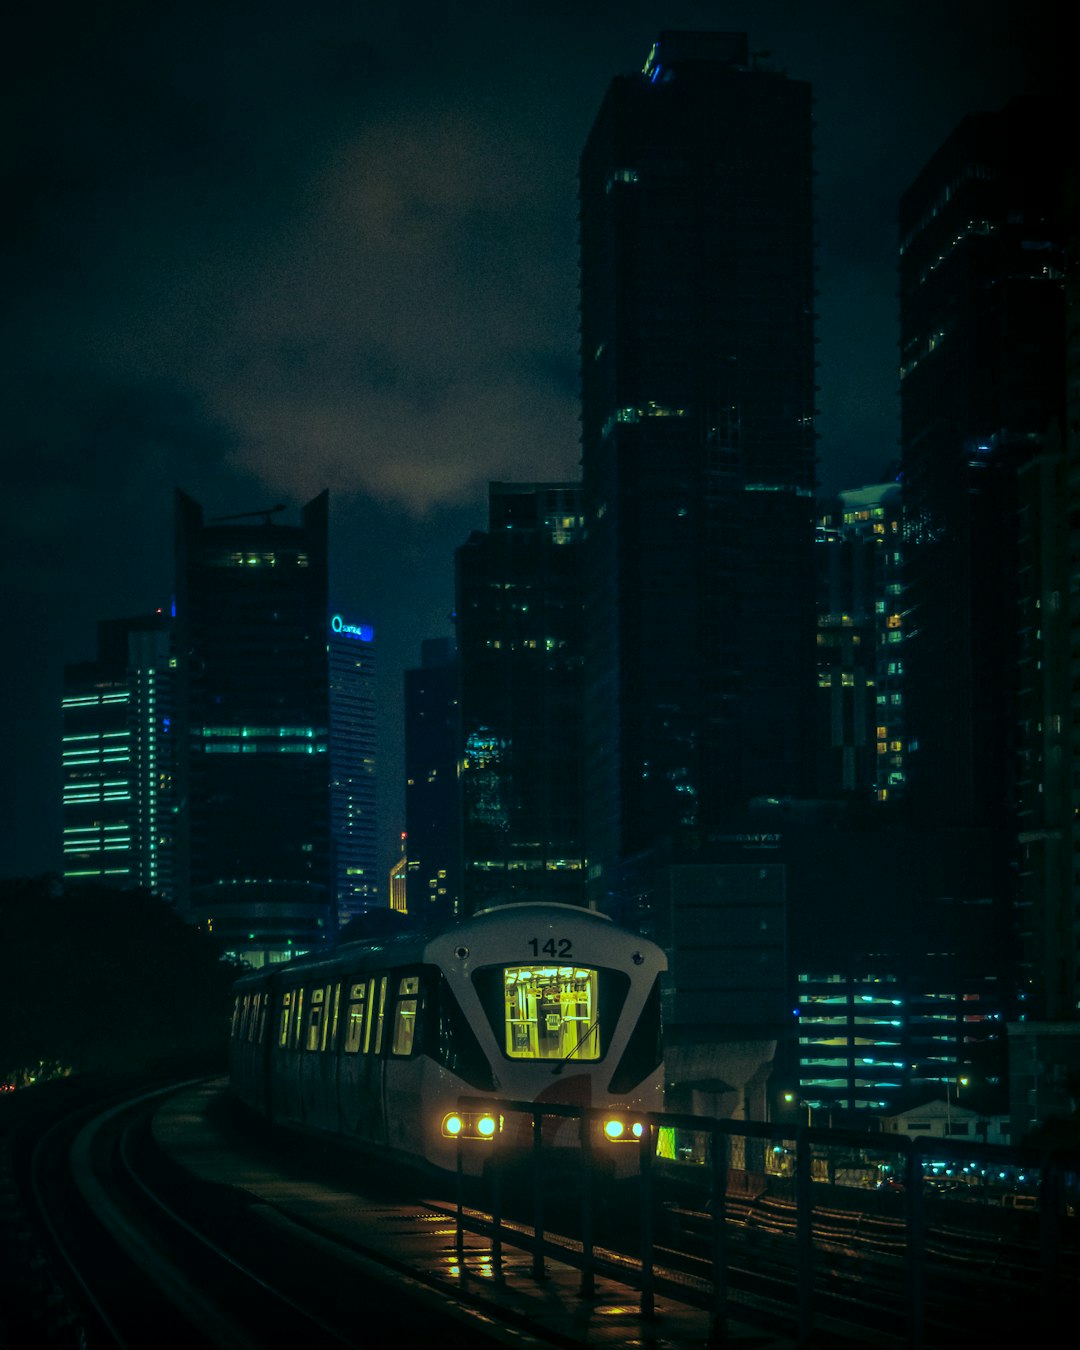 white train on rail road during night time